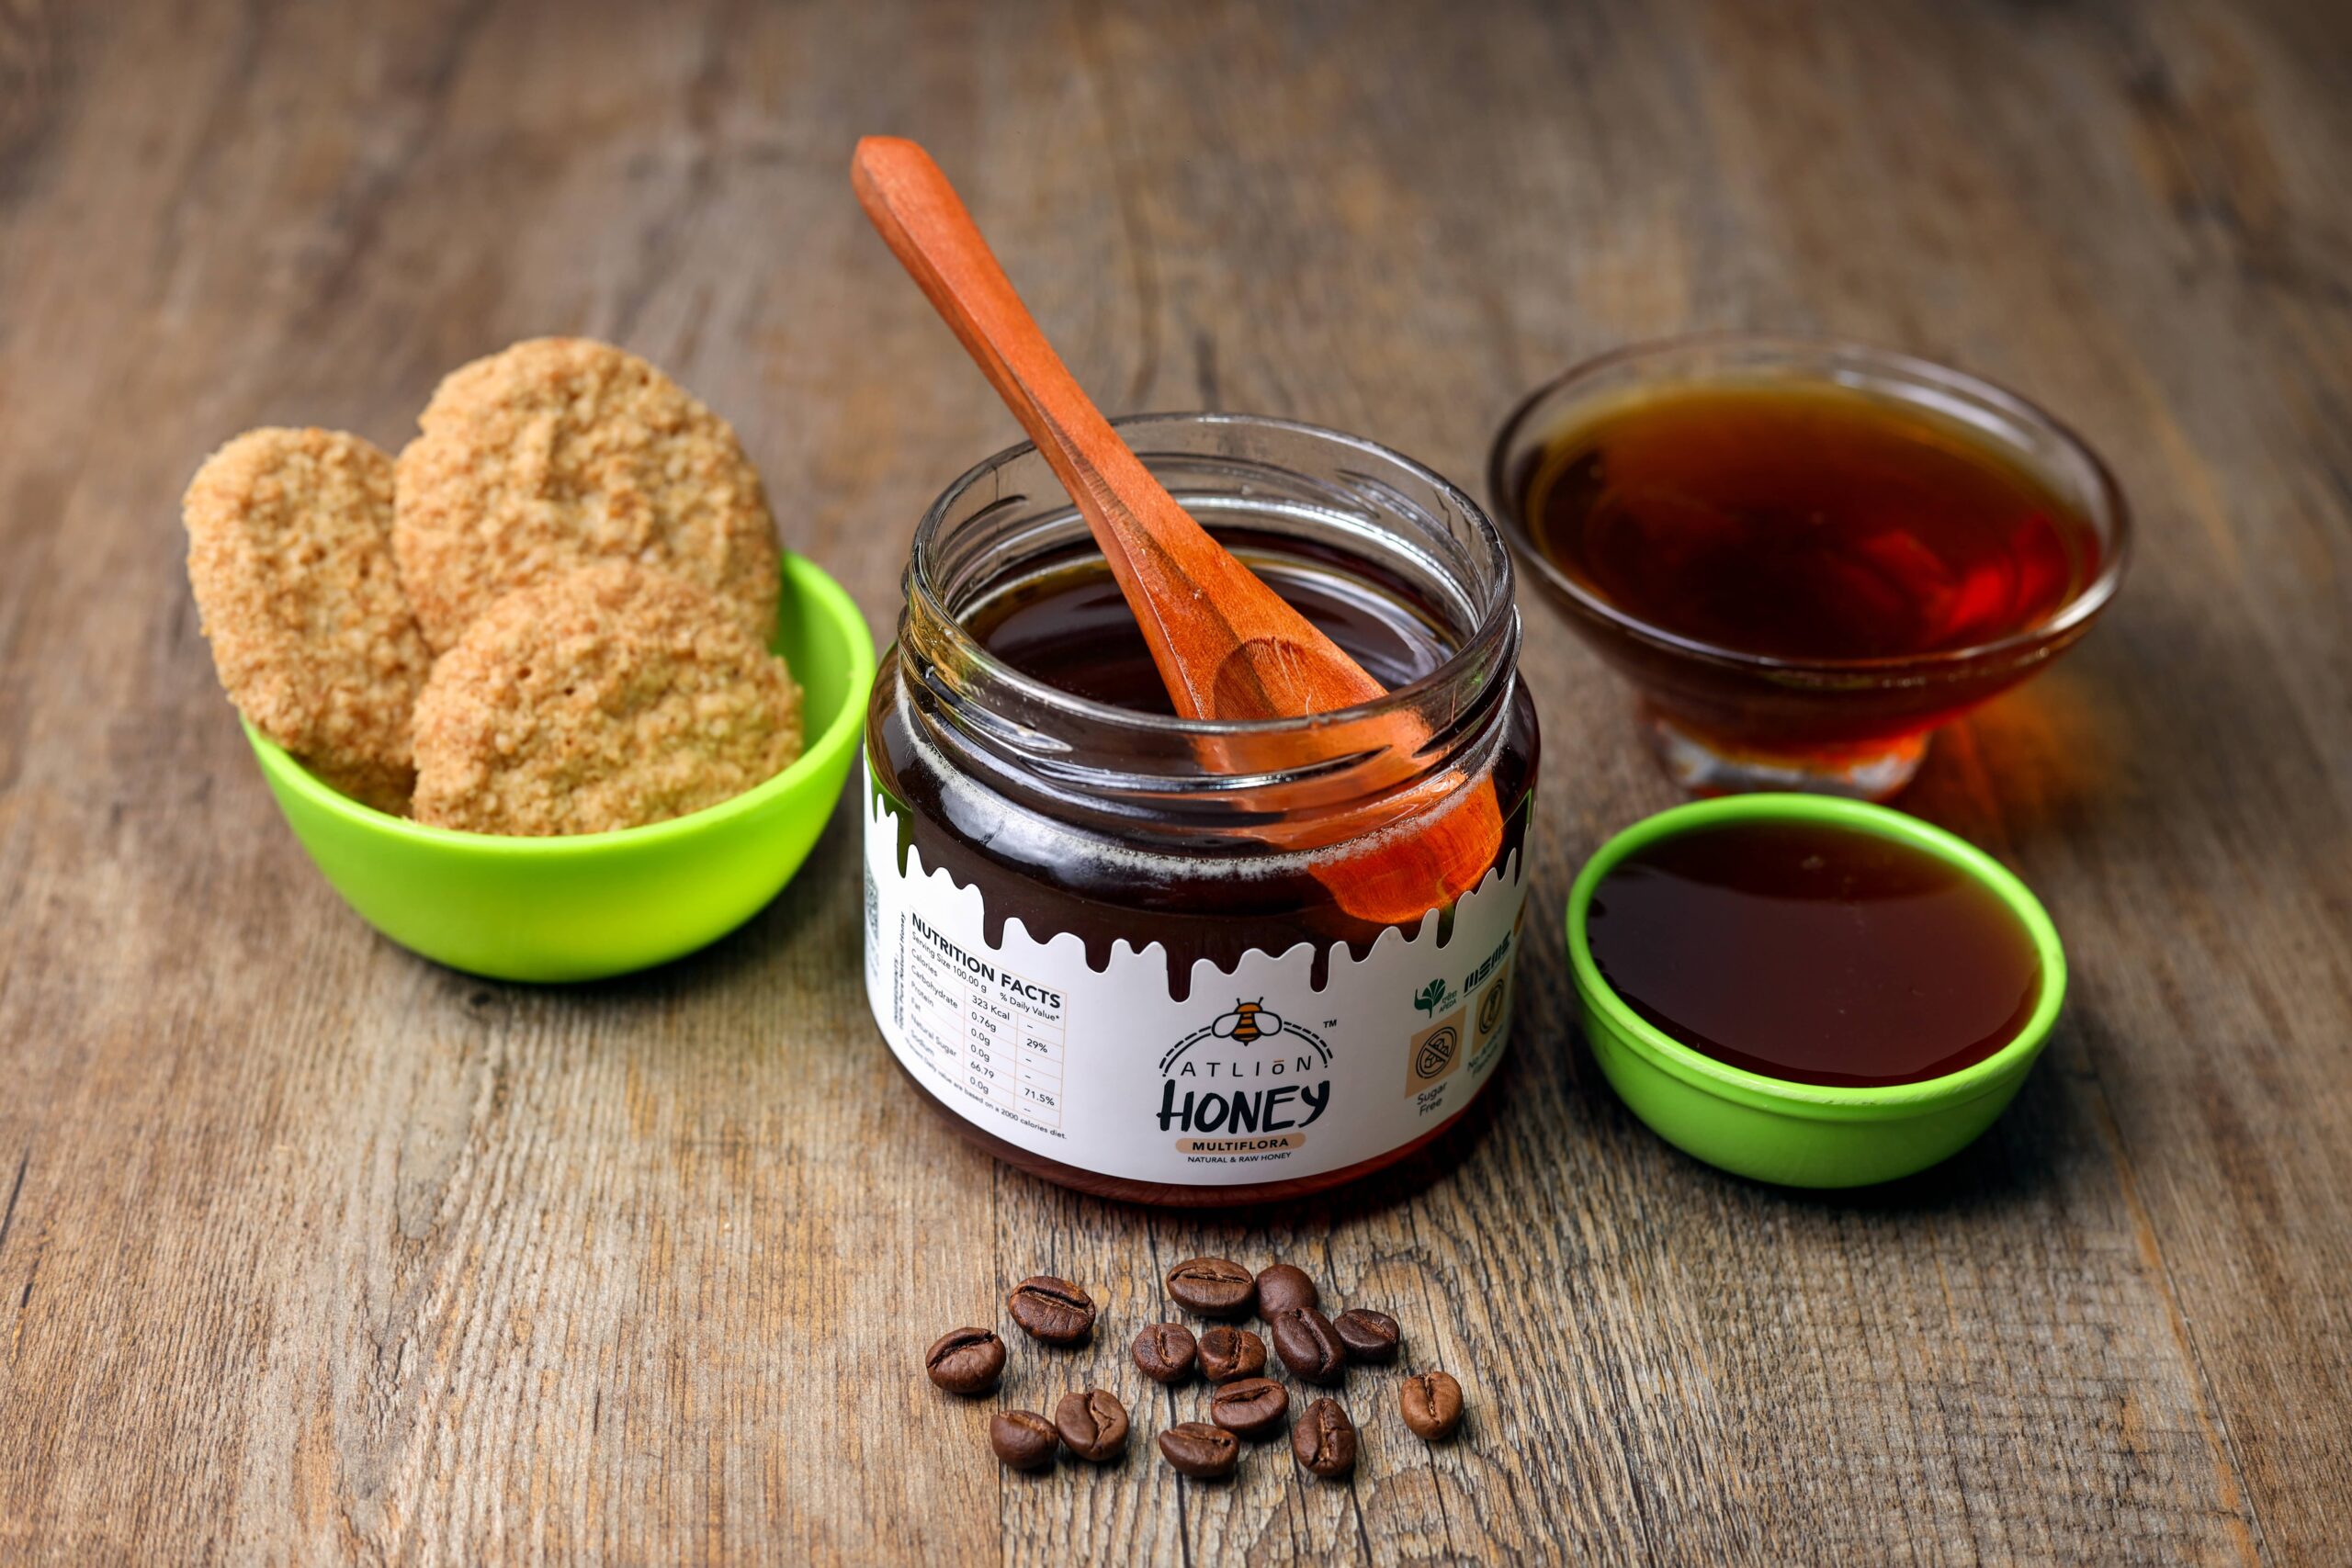 Best quality honey 350g jar with a wooden spoon and coockies for healthy breakfast